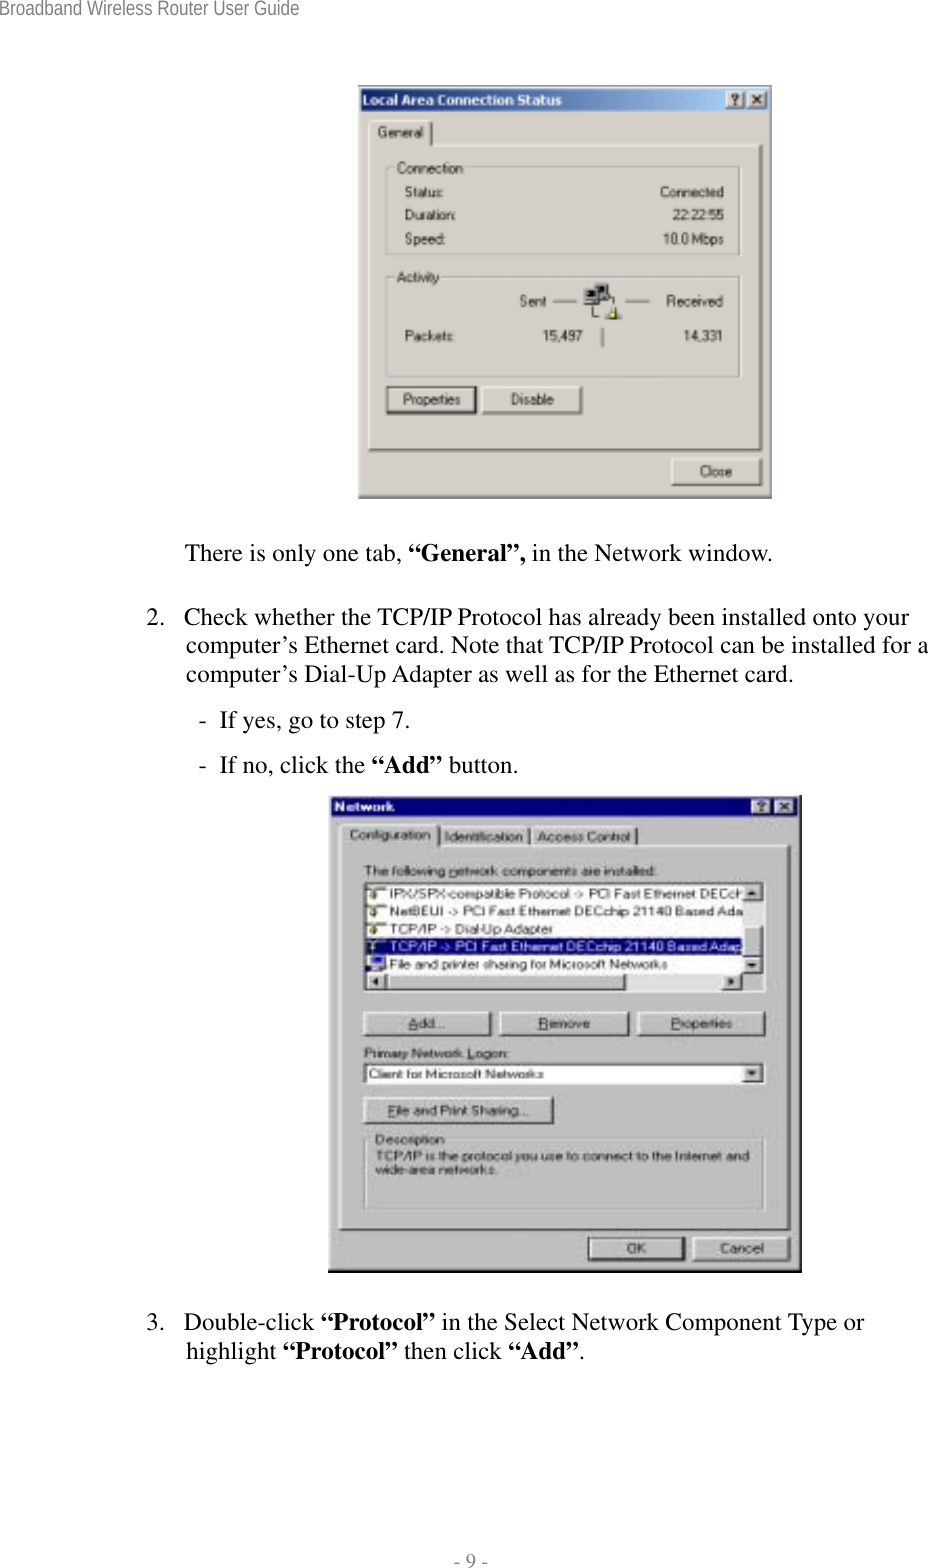 Broadband Wireless Router User Guide  - 9 -  There is only one tab, “General”, in the Network window. 2.  Check whether the TCP/IP Protocol has already been installed onto your computer’s Ethernet card. Note that TCP/IP Protocol can be installed for a computer’s Dial-Up Adapter as well as for the Ethernet card.   -  If yes, go to step 7.   -  If no, click the “Add” button.  3. Double-click “Protocol” in the Select Network Component Type or highlight “Protocol” then click “Add”. 